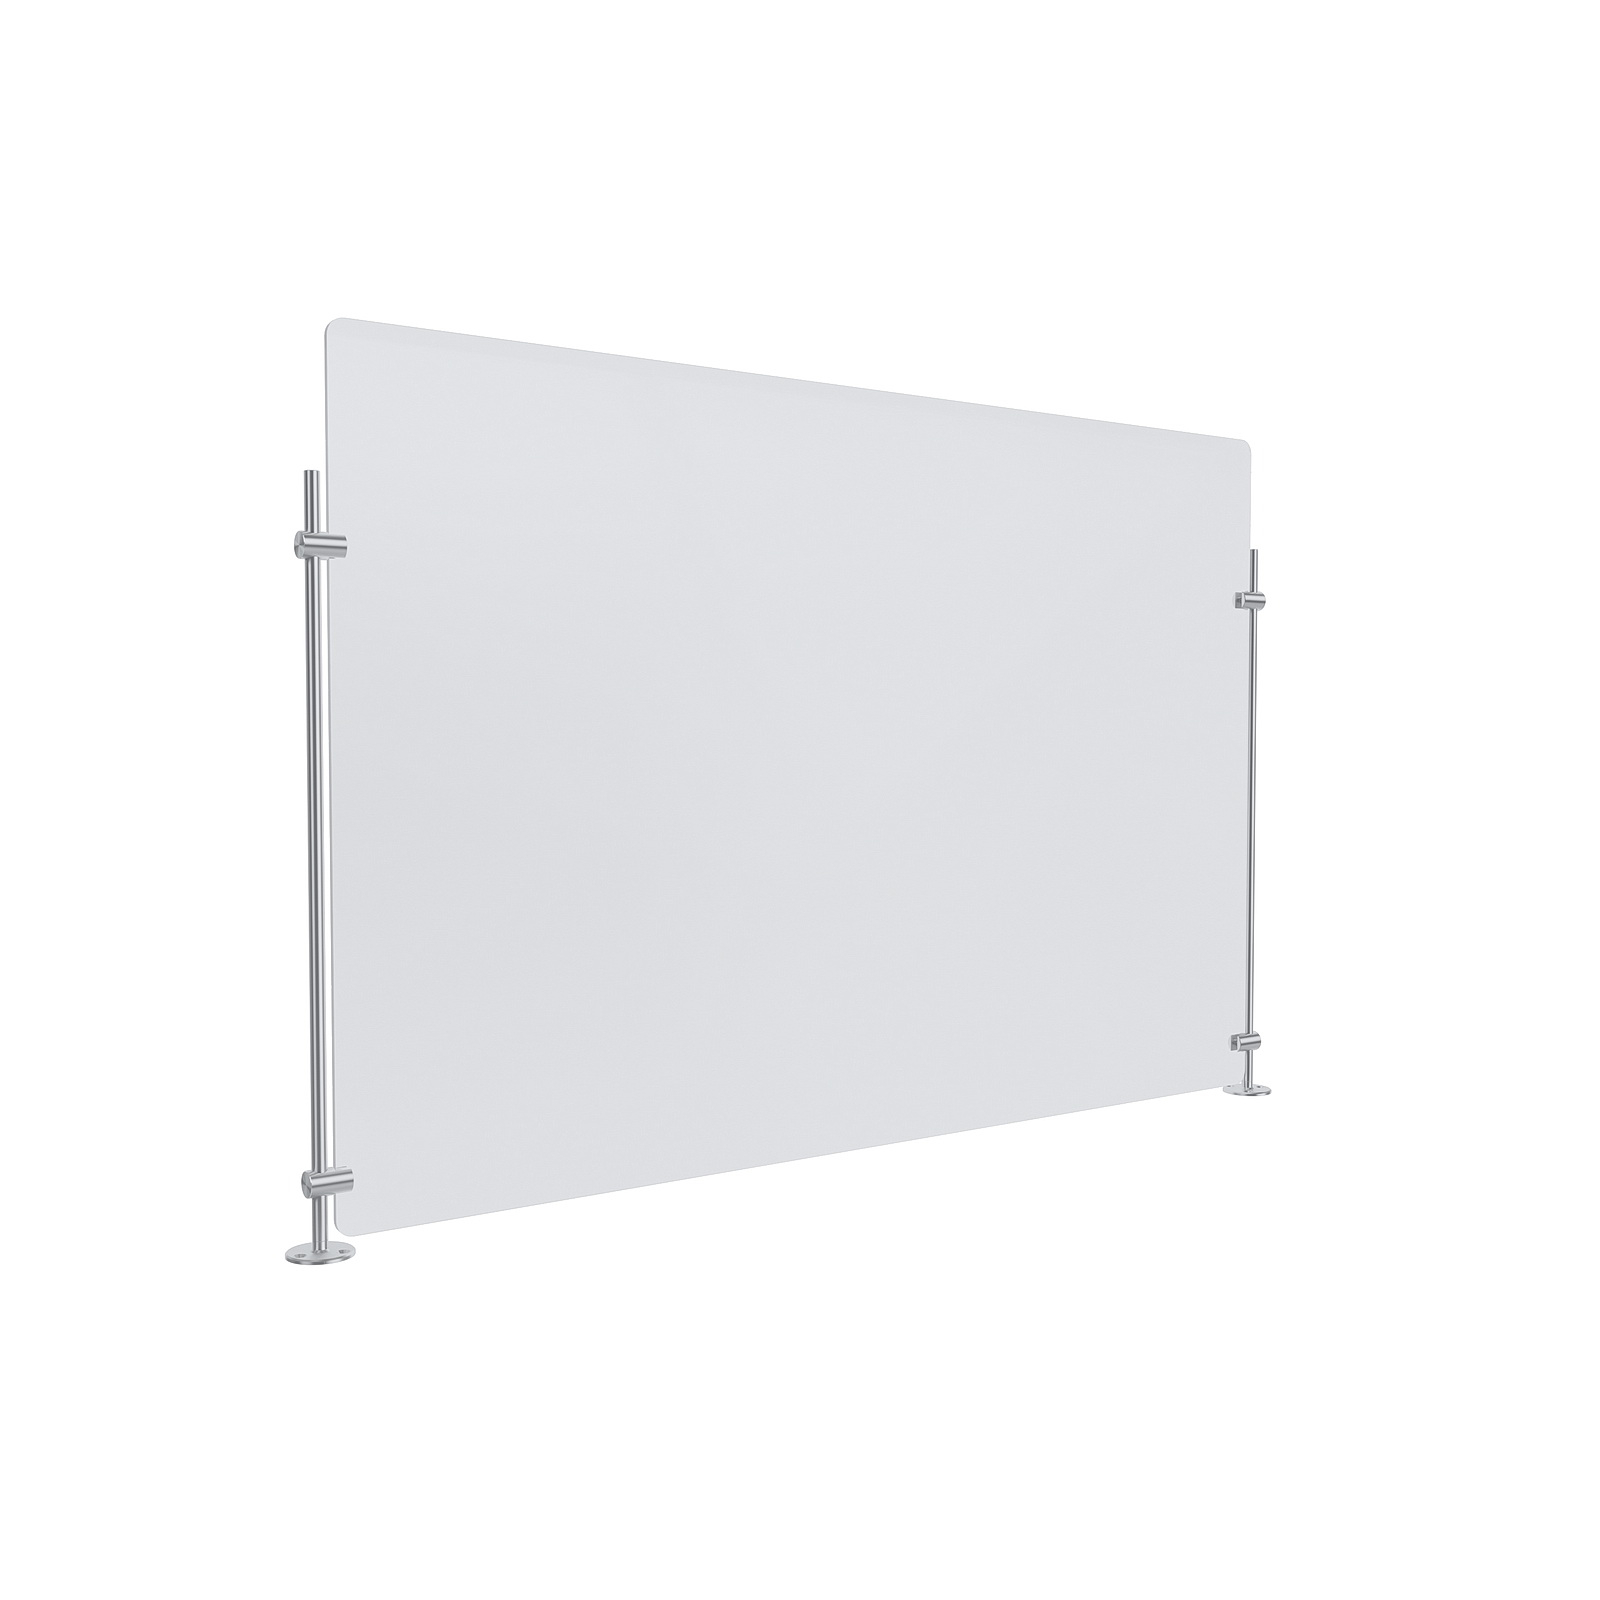 Clear Acrylic Sneeze Guard 35'' Wide x 23-1/2'' Tall, with (2) 20'' Tall x 3/8'' Diameter Clear Anodized Aluminum Rods on the Side.